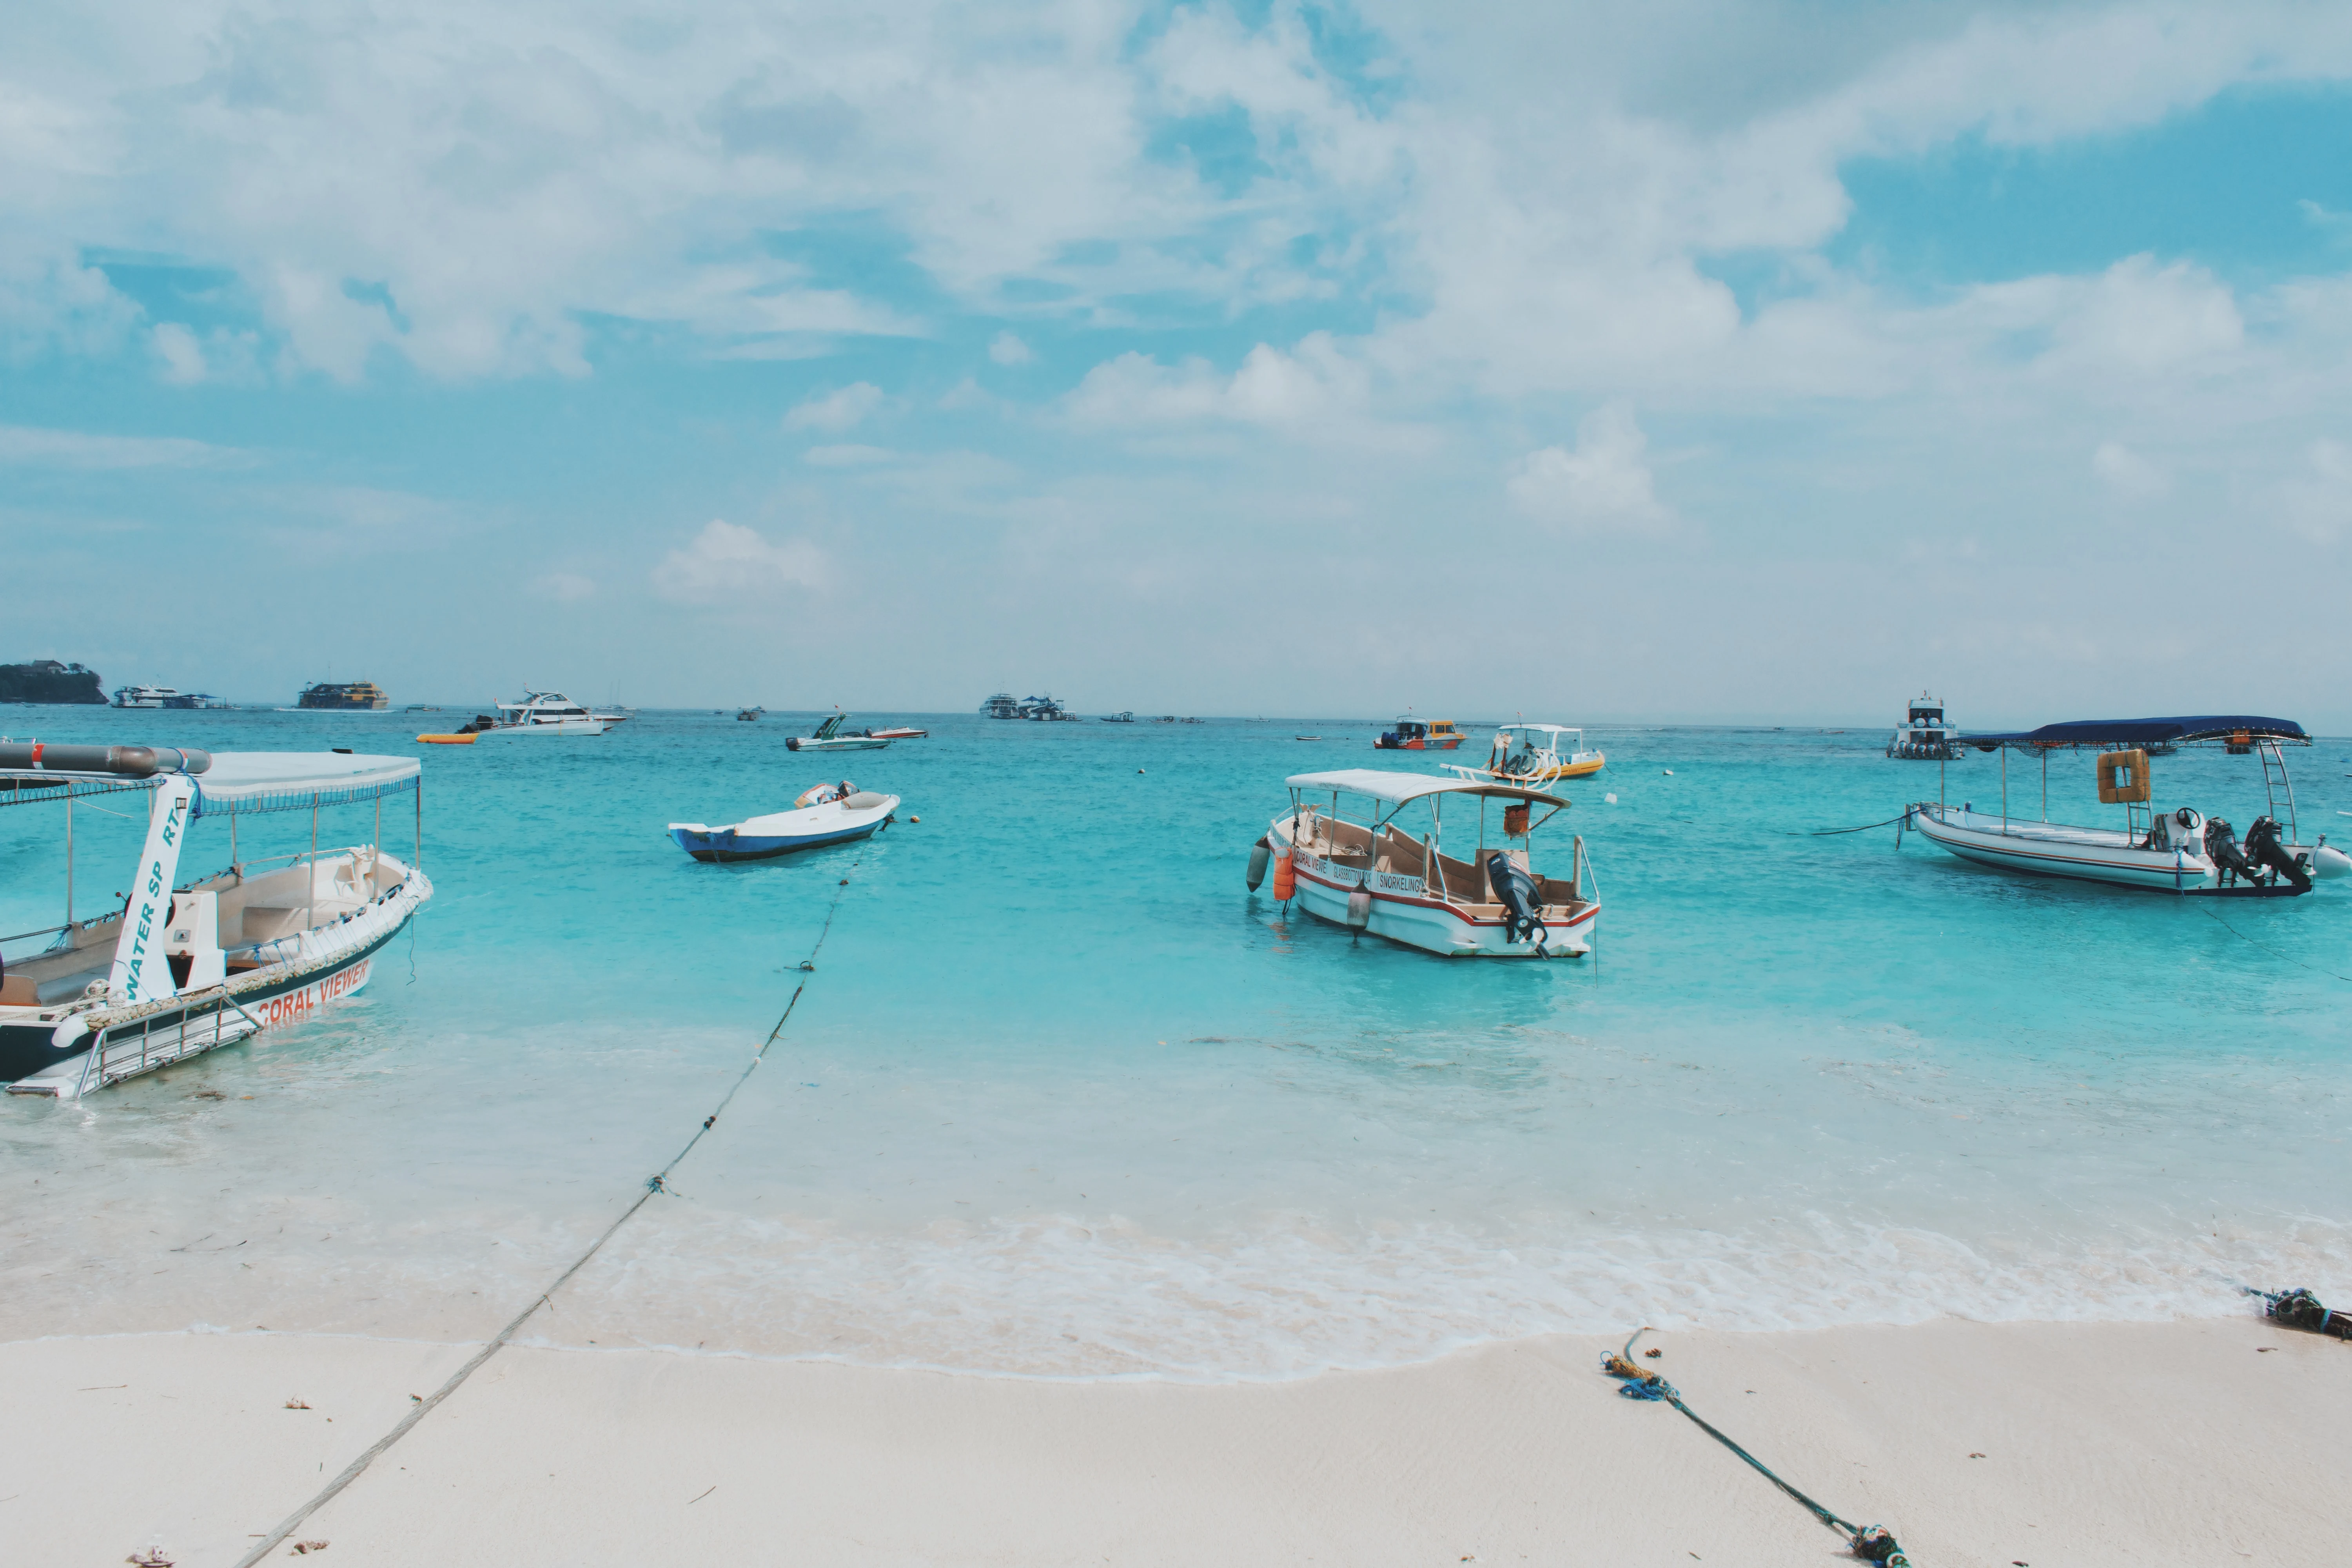 how to get to Nusa Lembongan from Bali, how to get to nusa lembongan, bali to nusa lembongan, nusa lembongan to nusa penida, ubud to nusa lembongan, boat to nusa lembongan